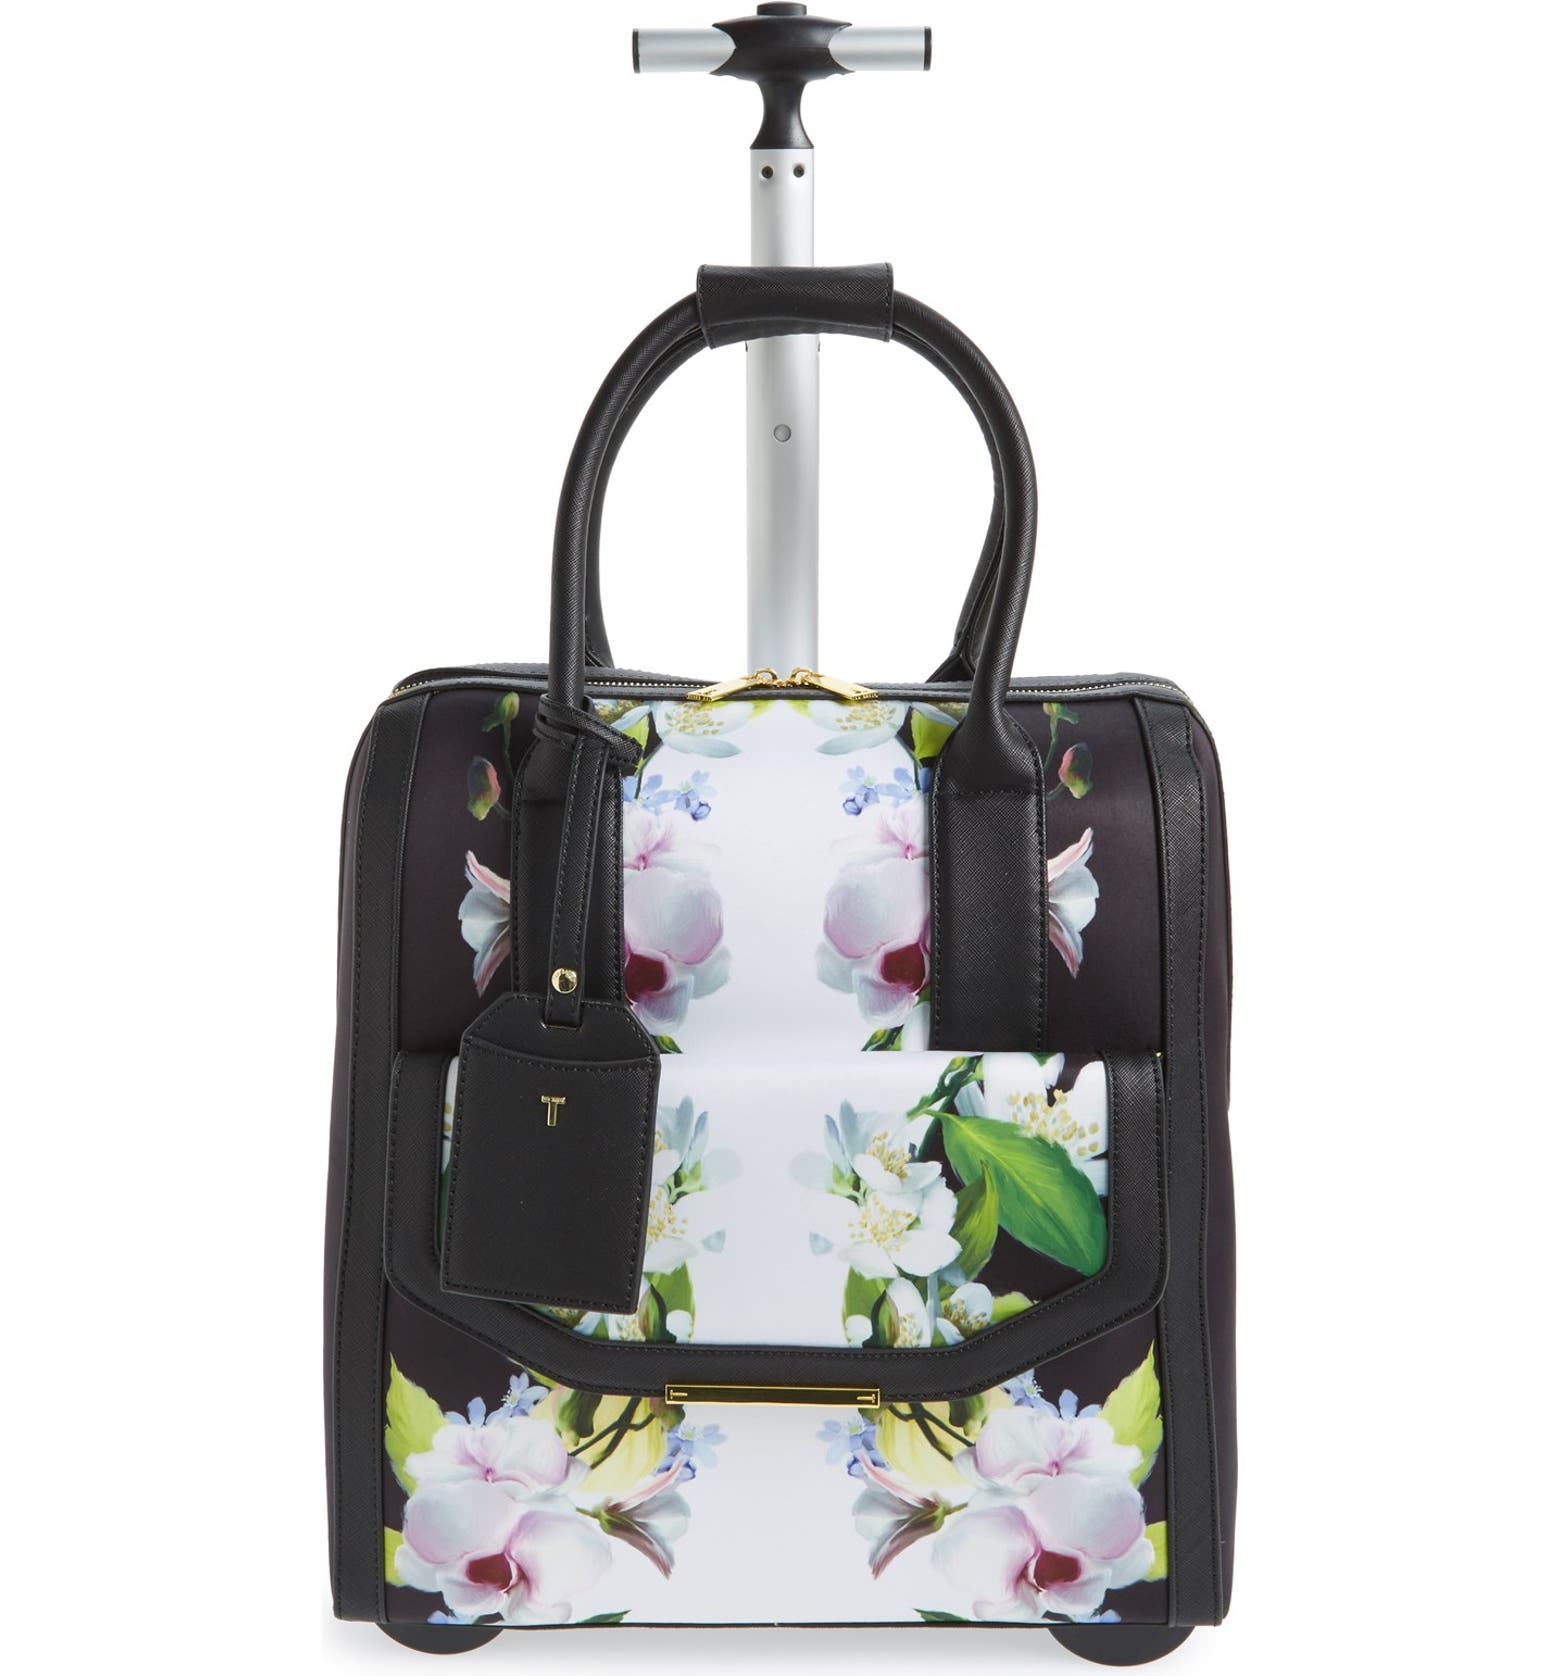 Ted Baker London 'Forget Me Not' Two Wheel Travel Bag | Nordstrom